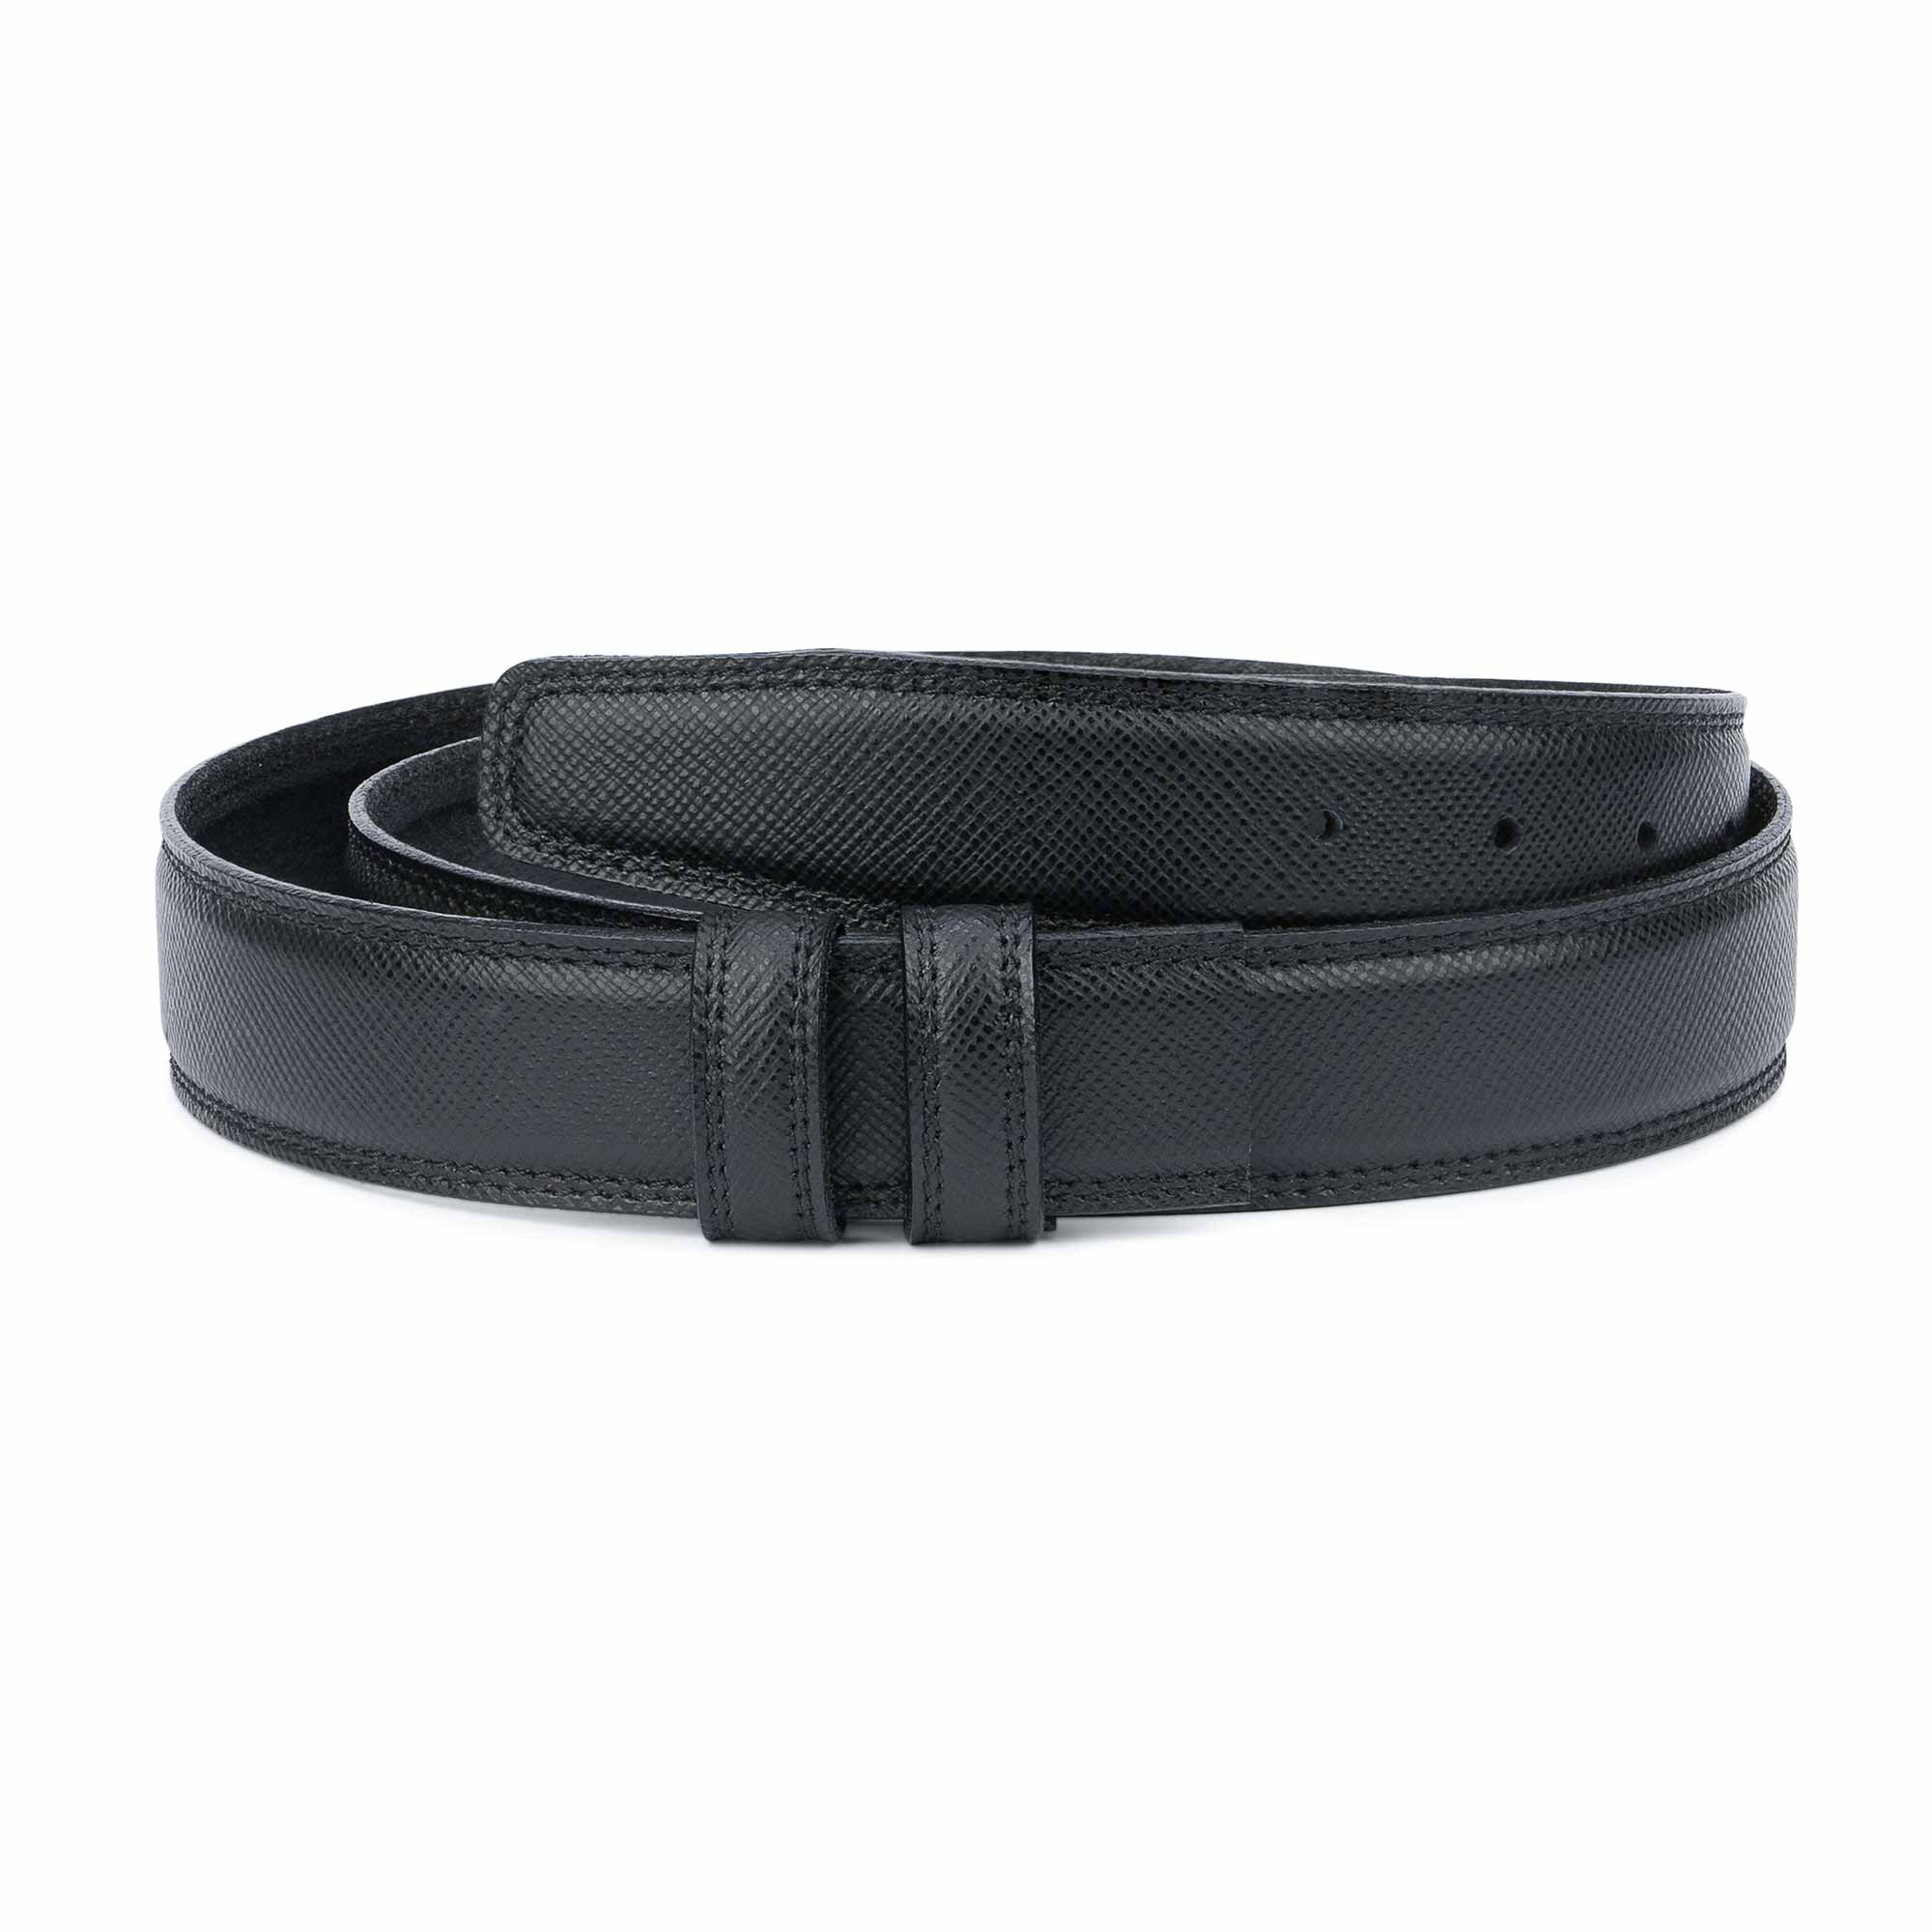 Saffiano Mens Black leather belt Without buckle Dress Replacement strap ...